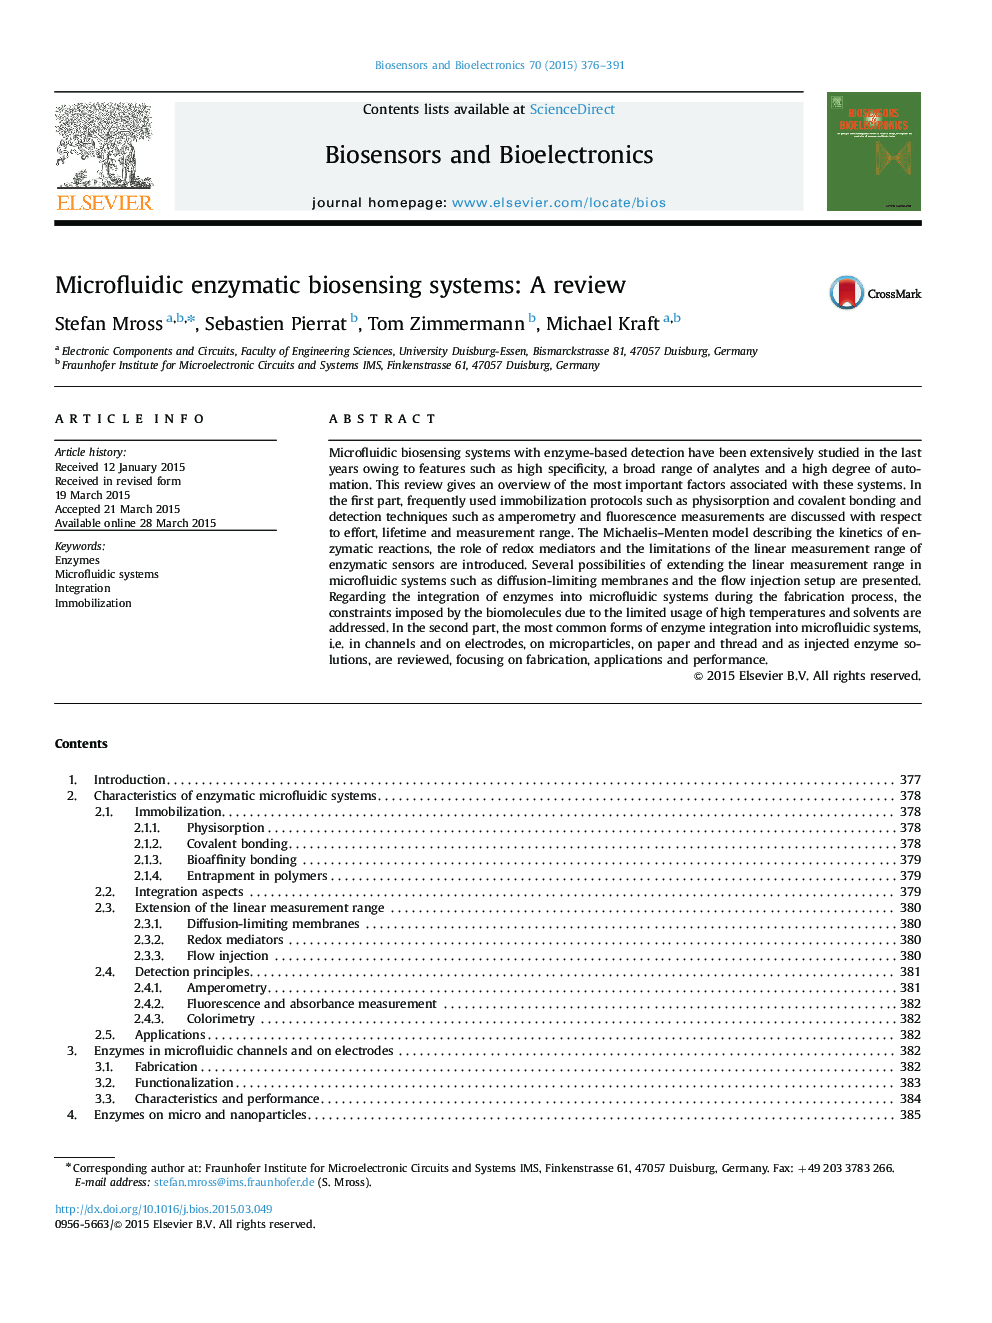 Microfluidic enzymatic biosensing systems: A review